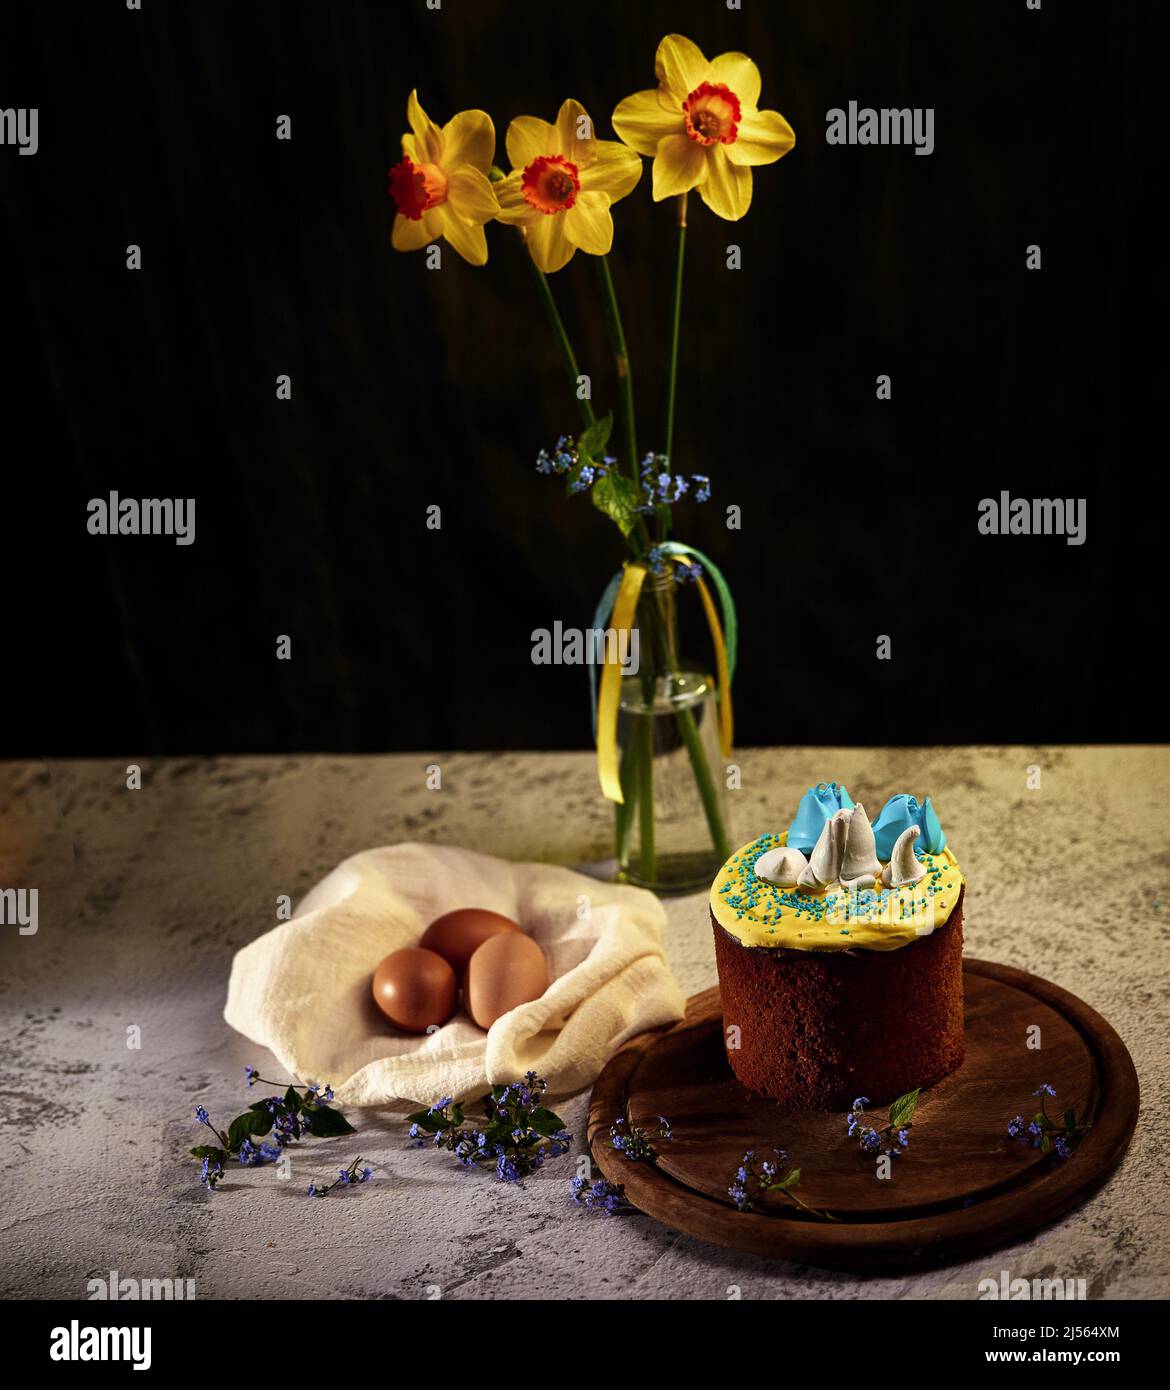 Easter board. Easter cake decorated with cream in the colors of the Ukrainian flag with blue flowers on a wooden board with eggs and daffodils in a va Stock Photo